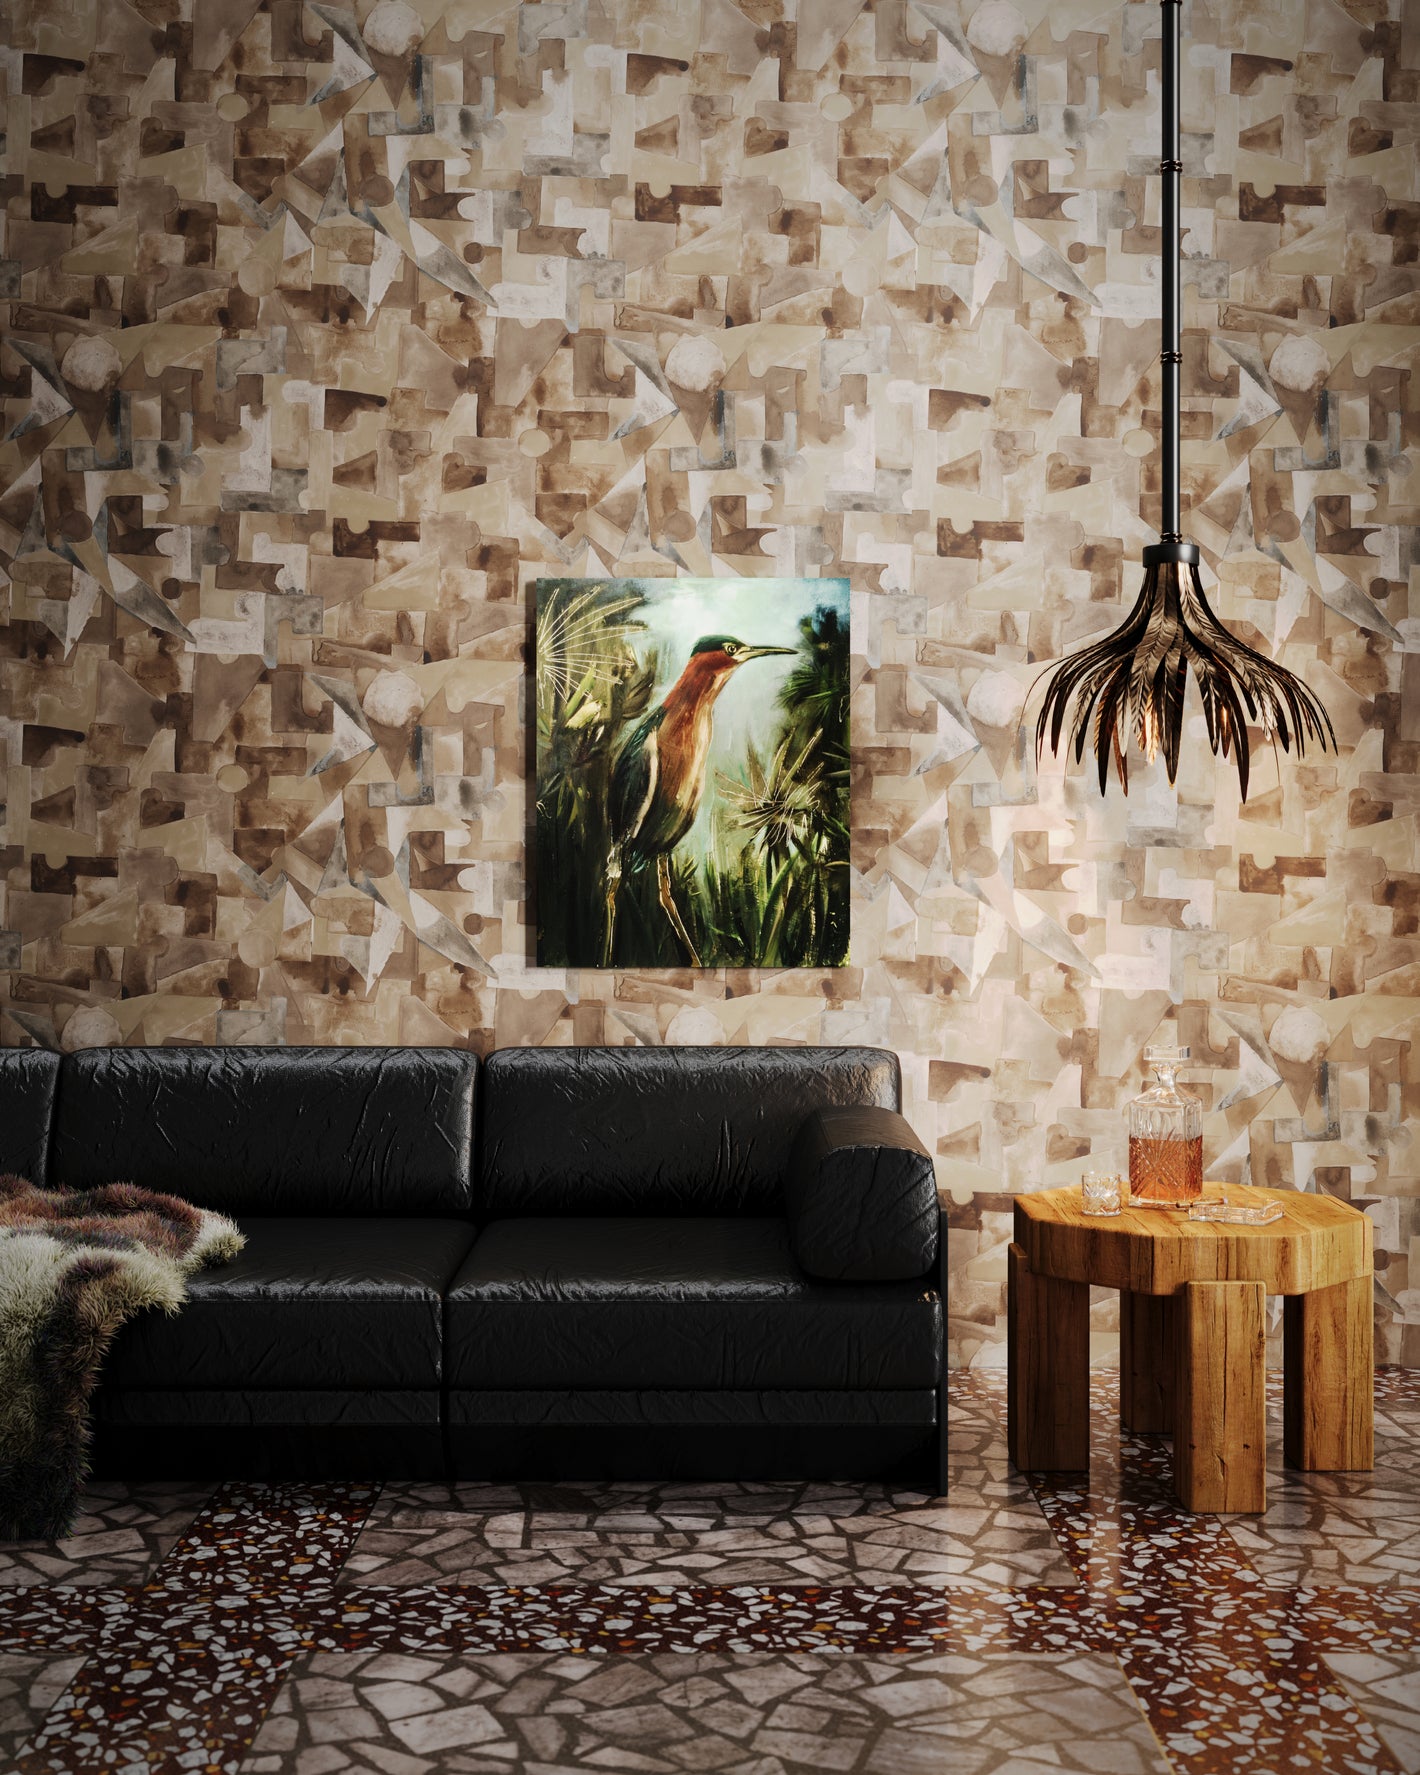 Pieces wallpaper in garnet in a room with a couch, wall decor, a low hanging ceiling light, and a side table.